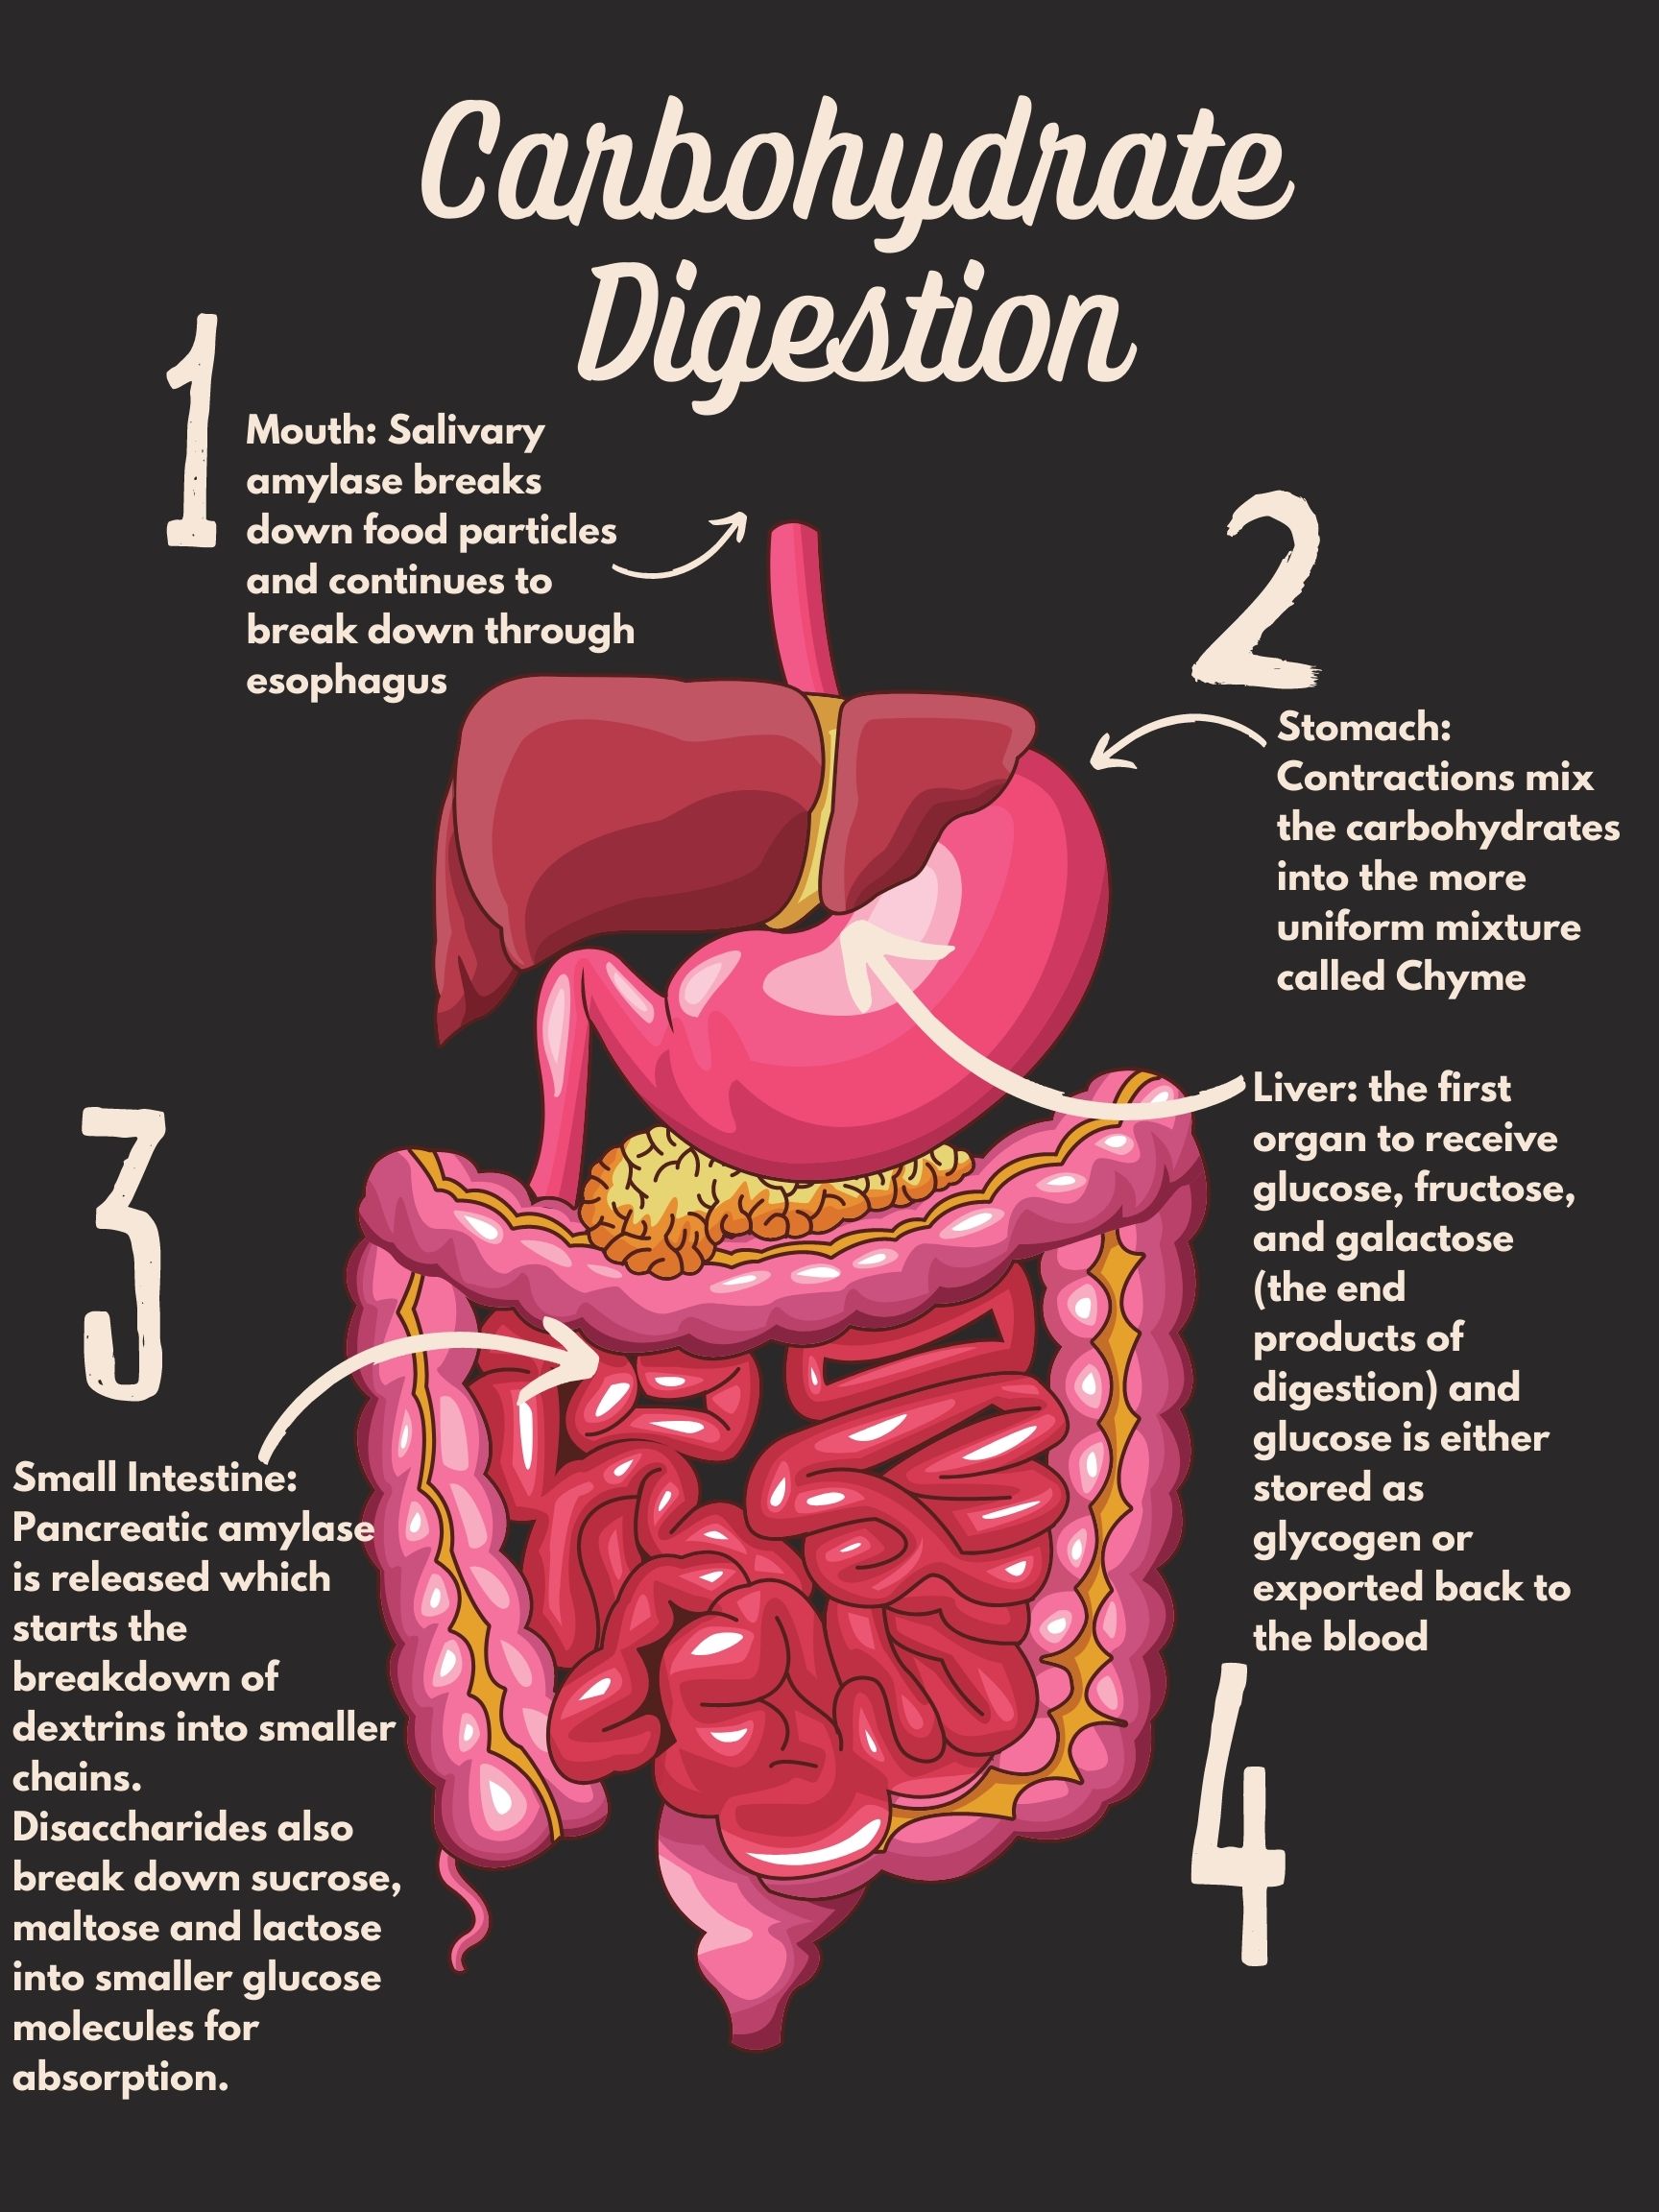 Infographic summarizing carbohydrate digestion and absorption